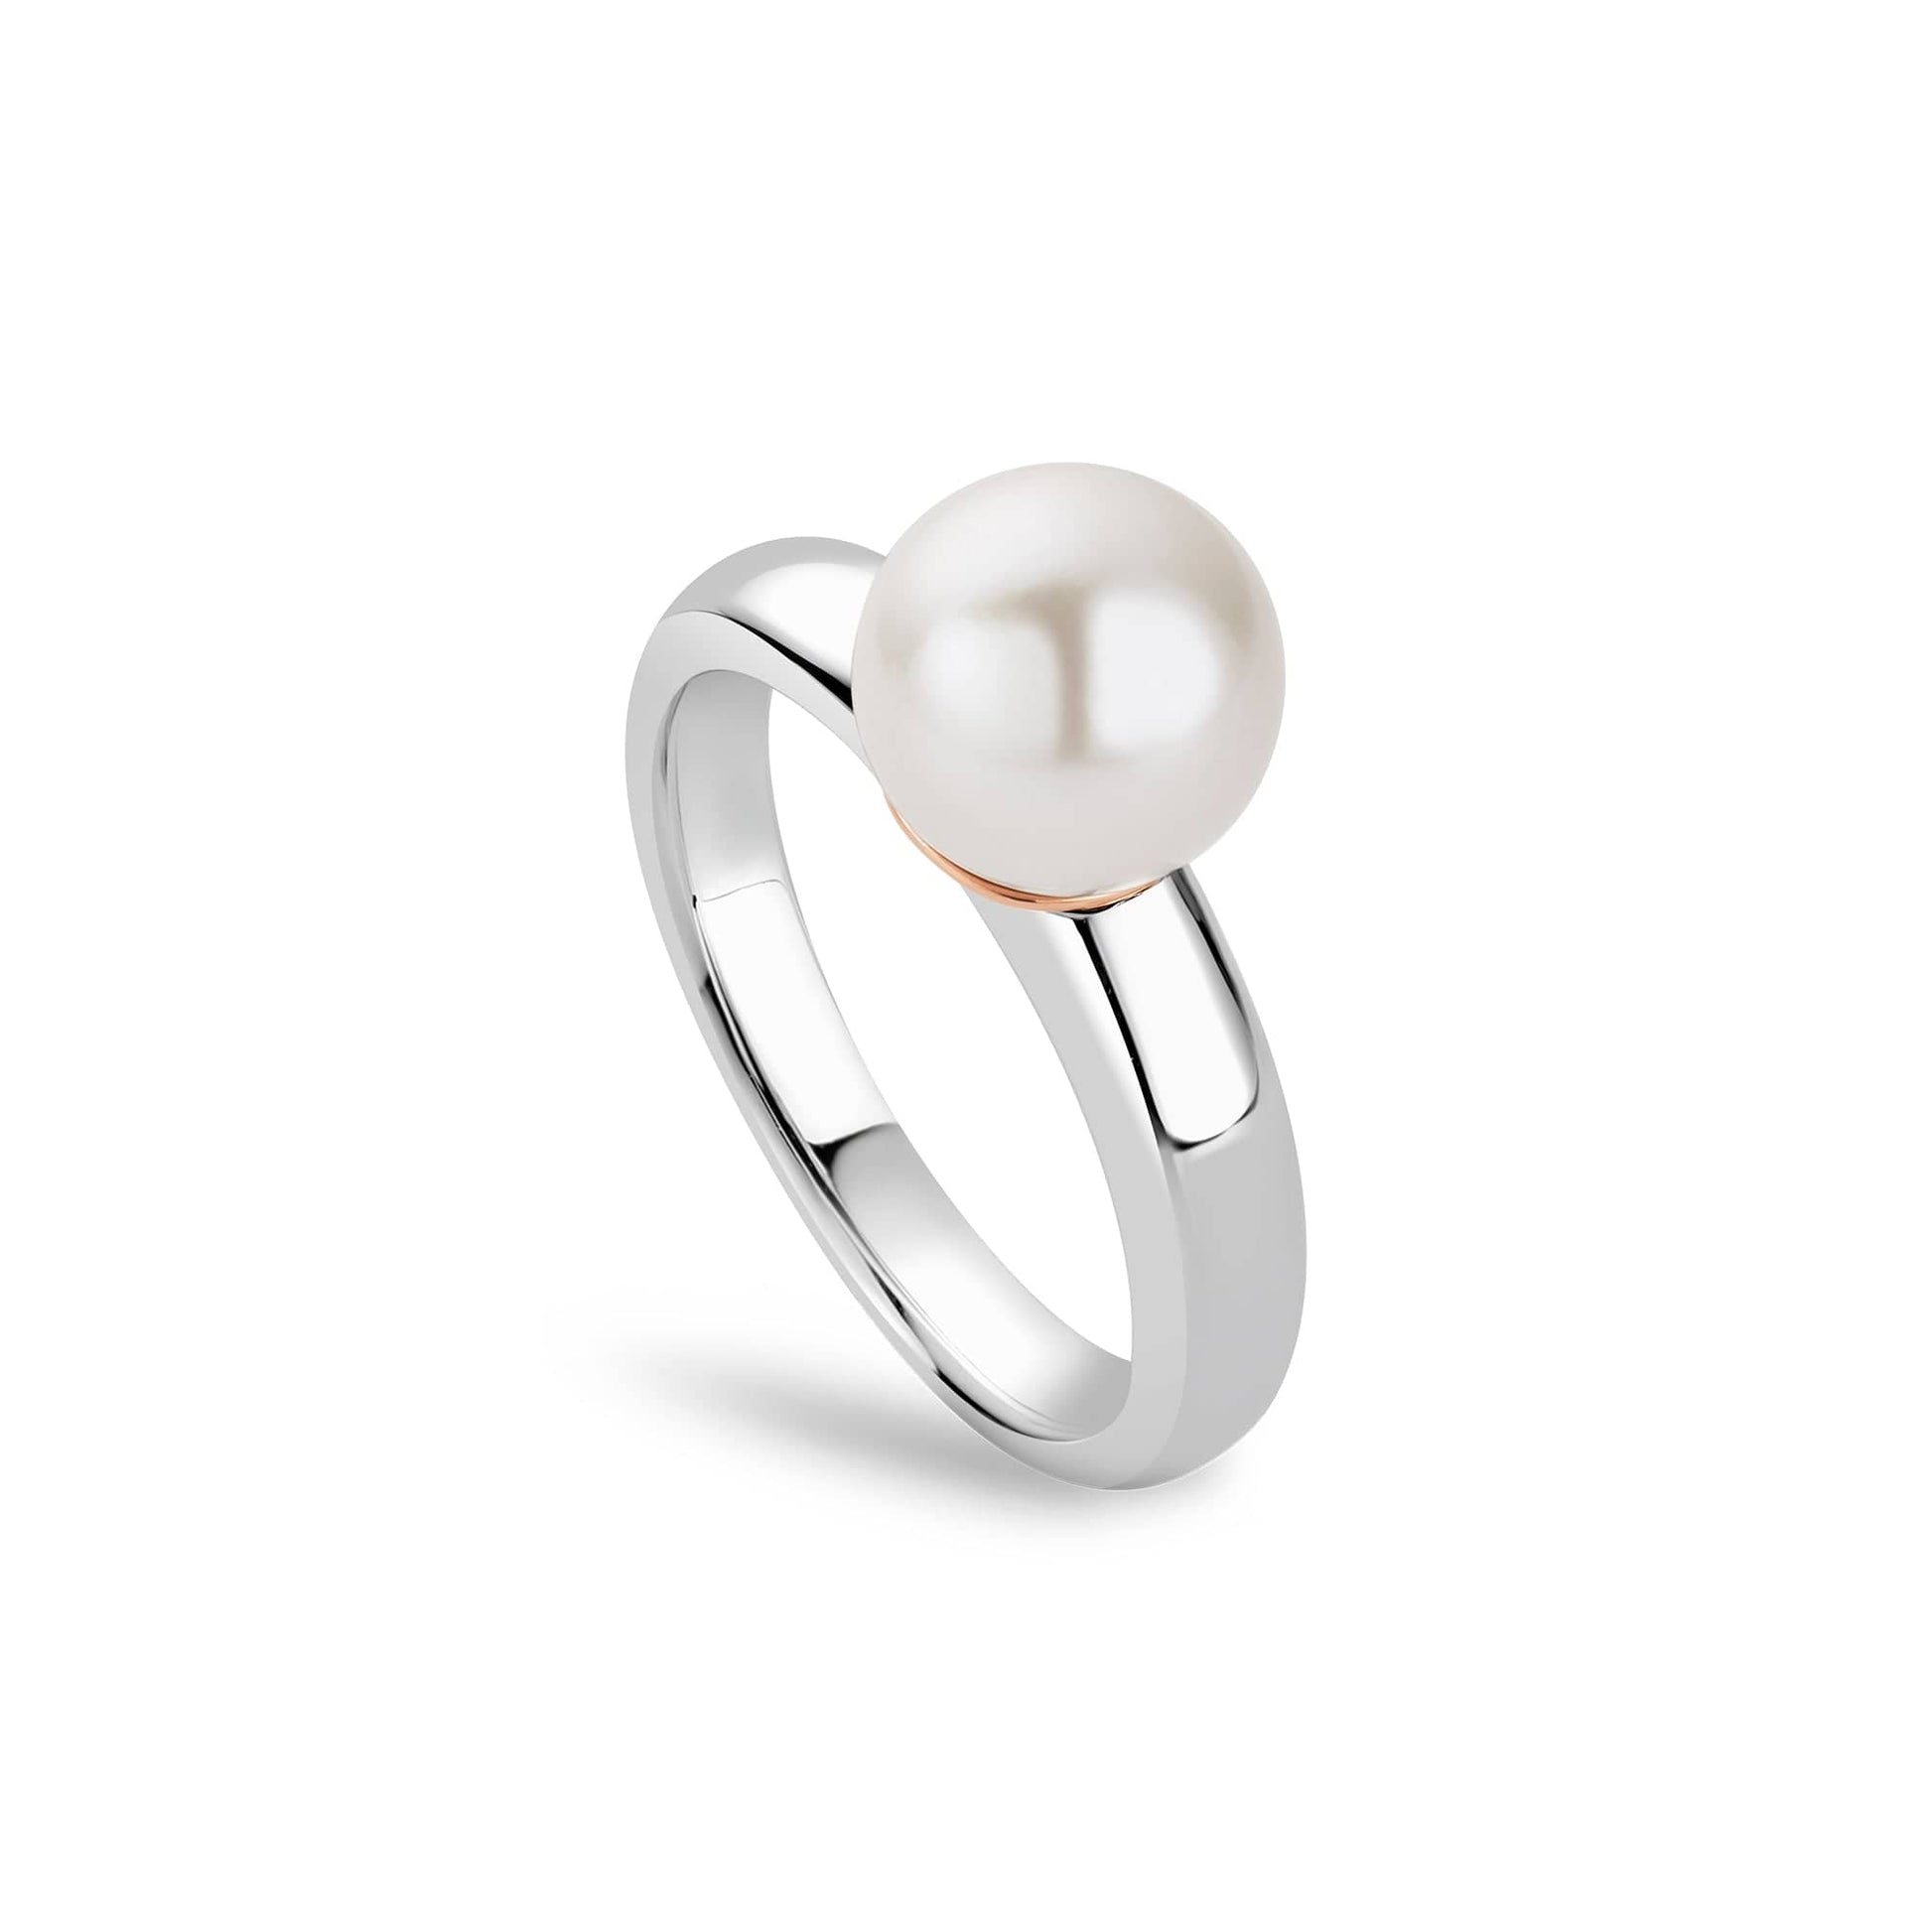 Beachcomber Silver and Pearl Ring